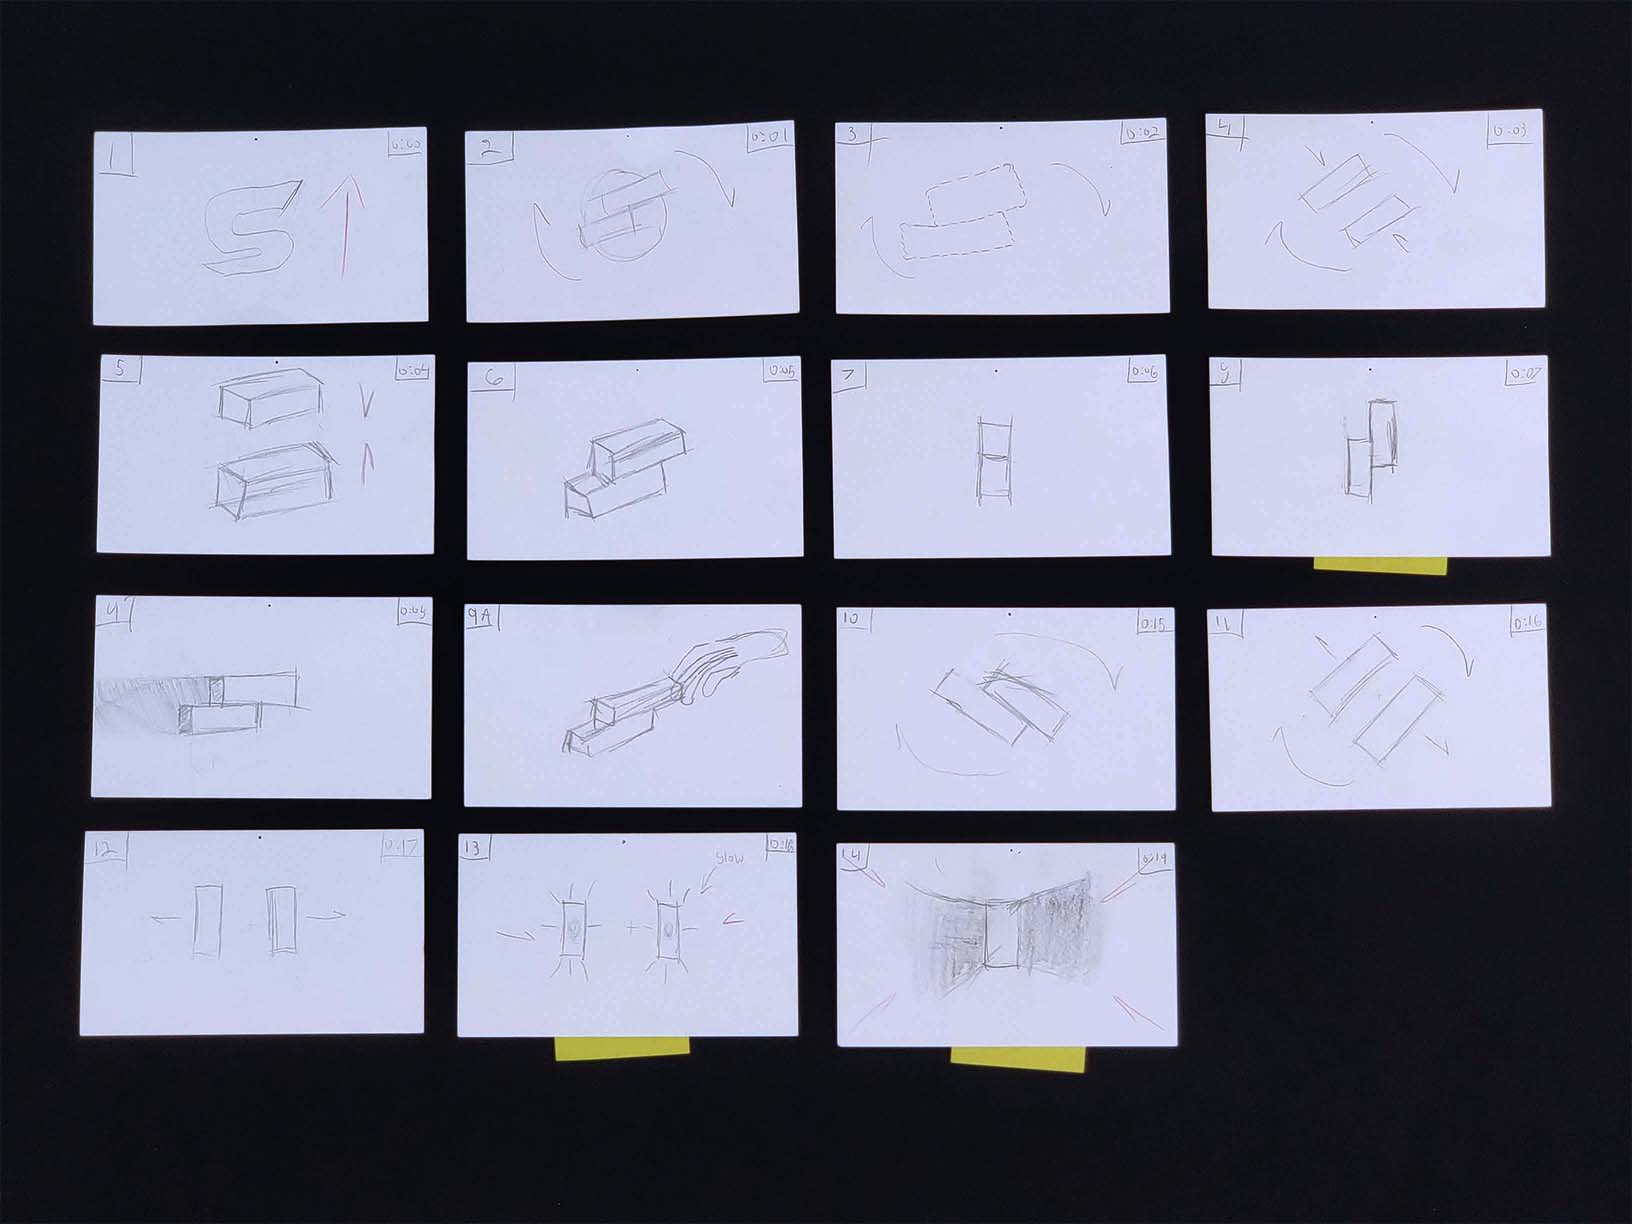 Act 1 storyboard. I marked the cards with yellow sticky notes to indicate them as styleframe contenders.